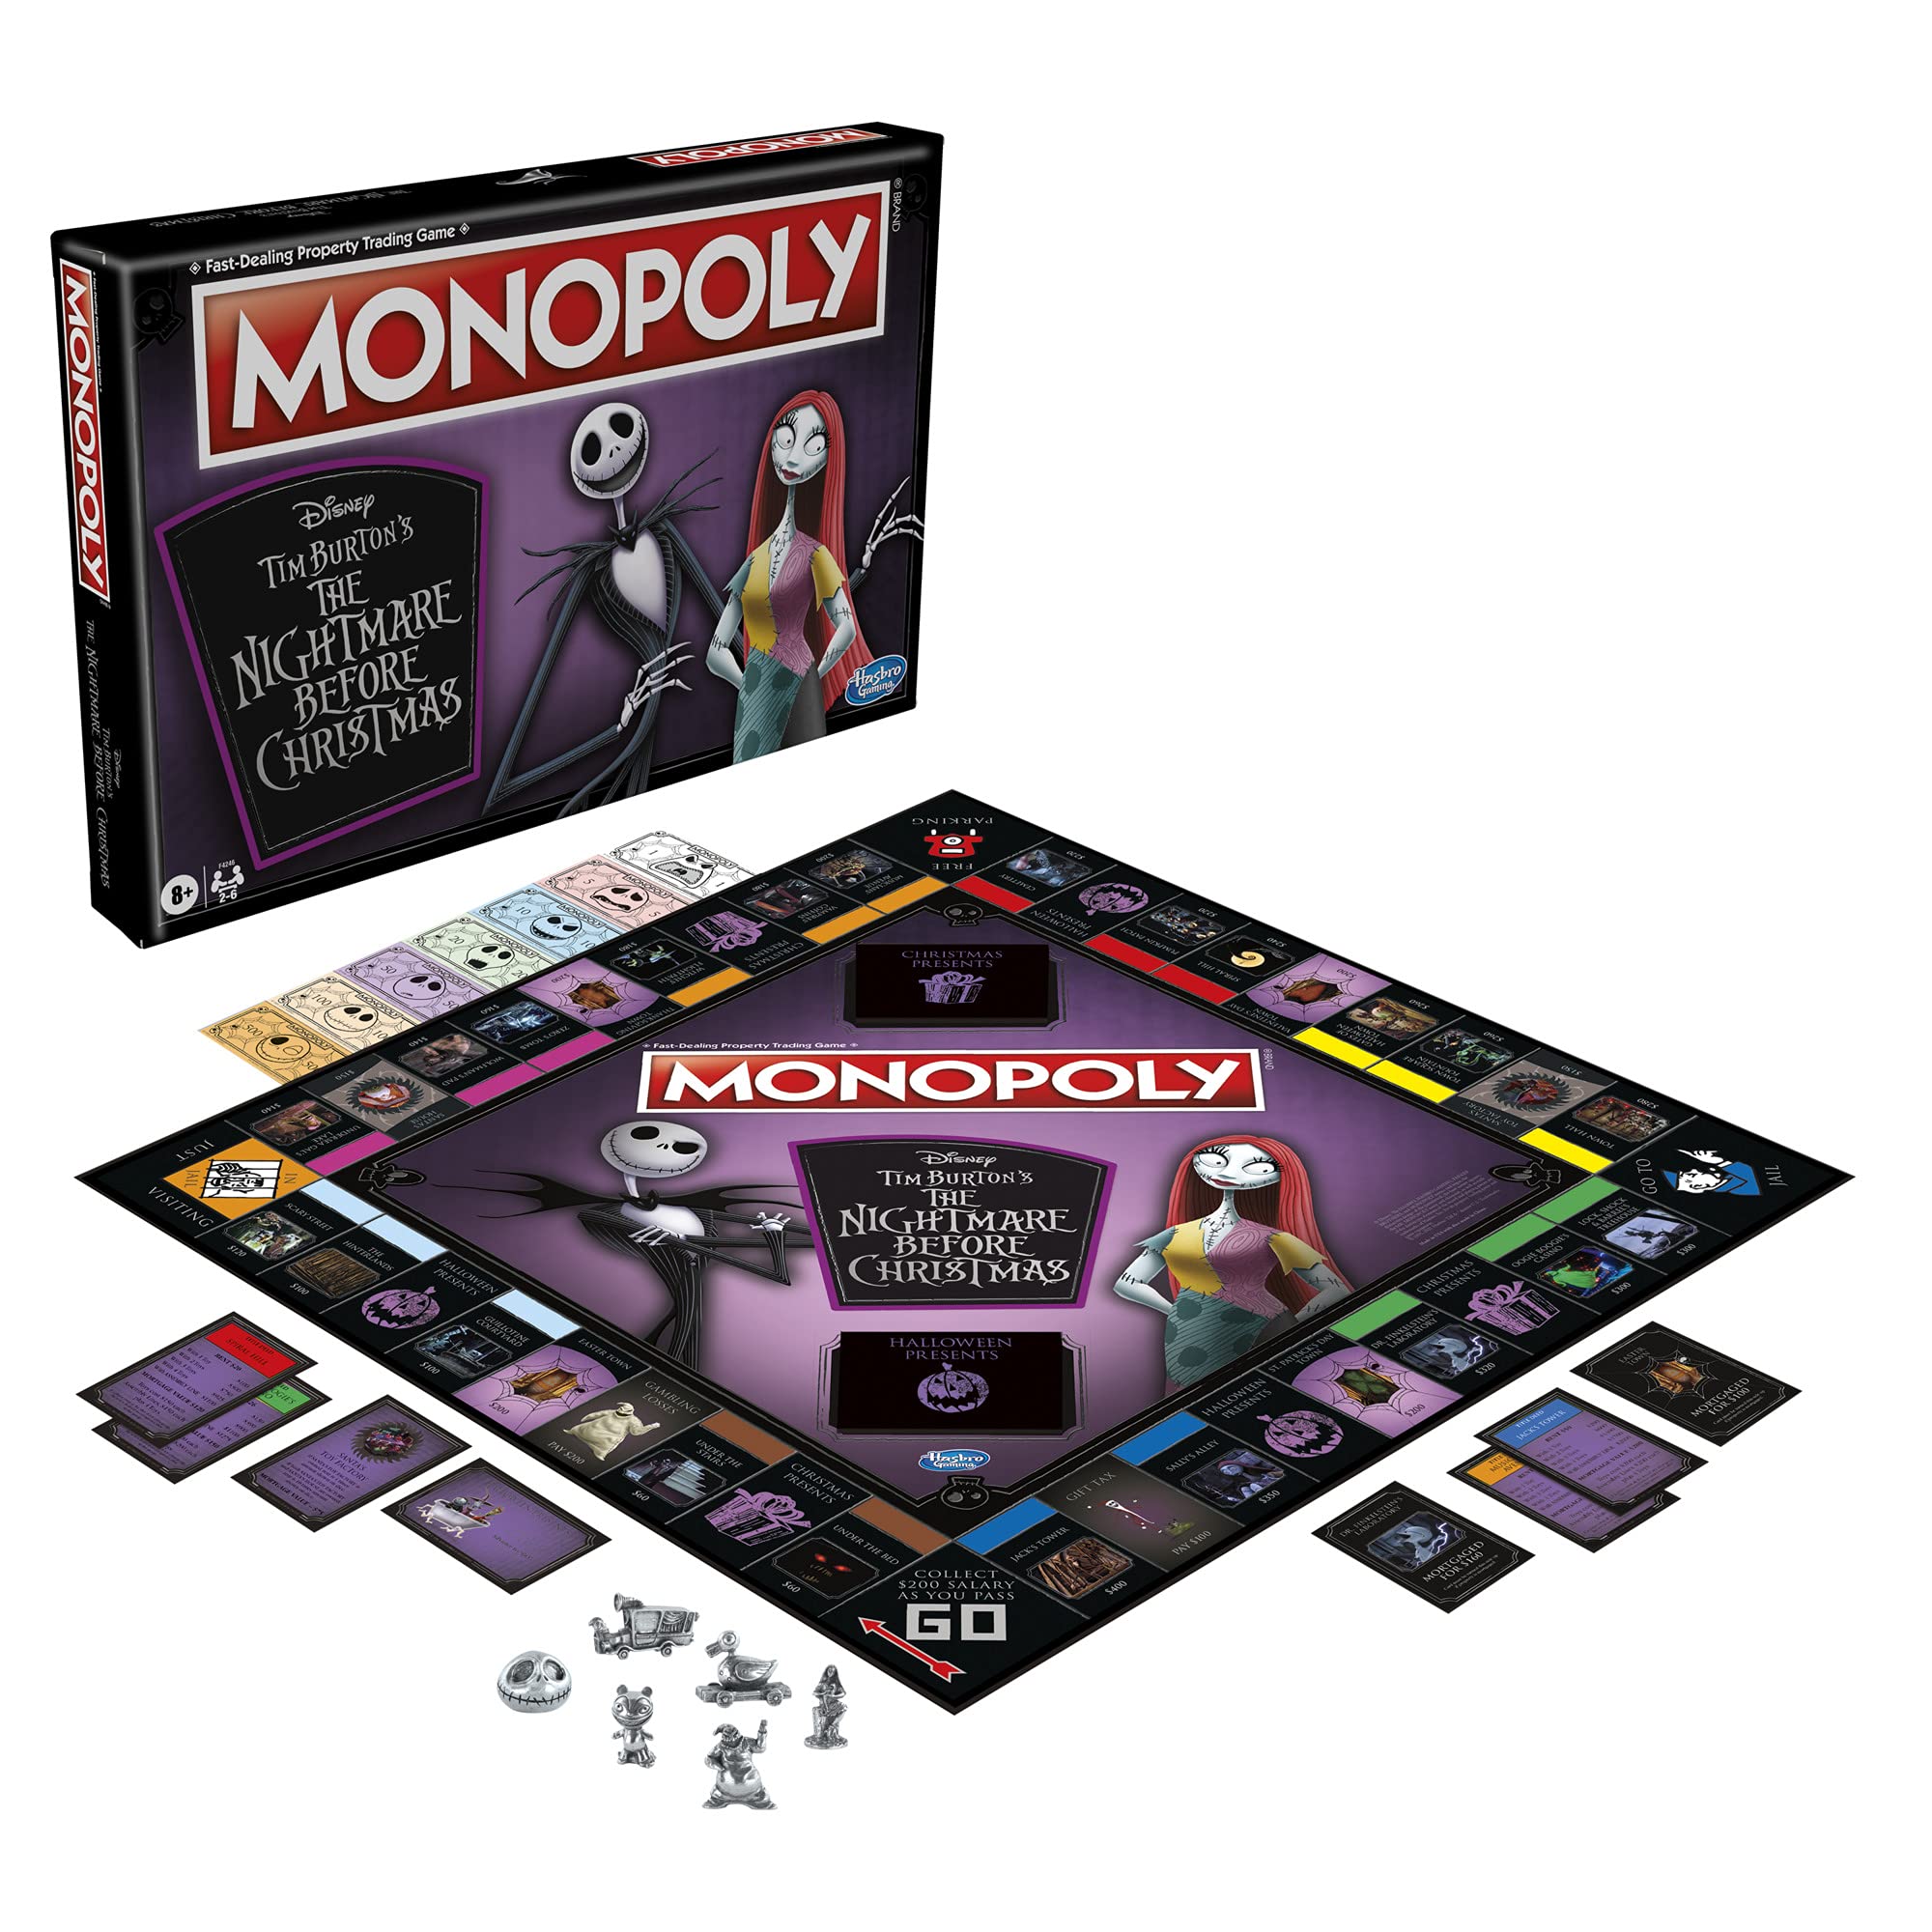 Monopoly: Disney Tim Burton's The Nightmare Before Christmas Edition Board Game, Fun Family Game, Board Game for Kids Ages 8 and Up (Amazon Exclusive)